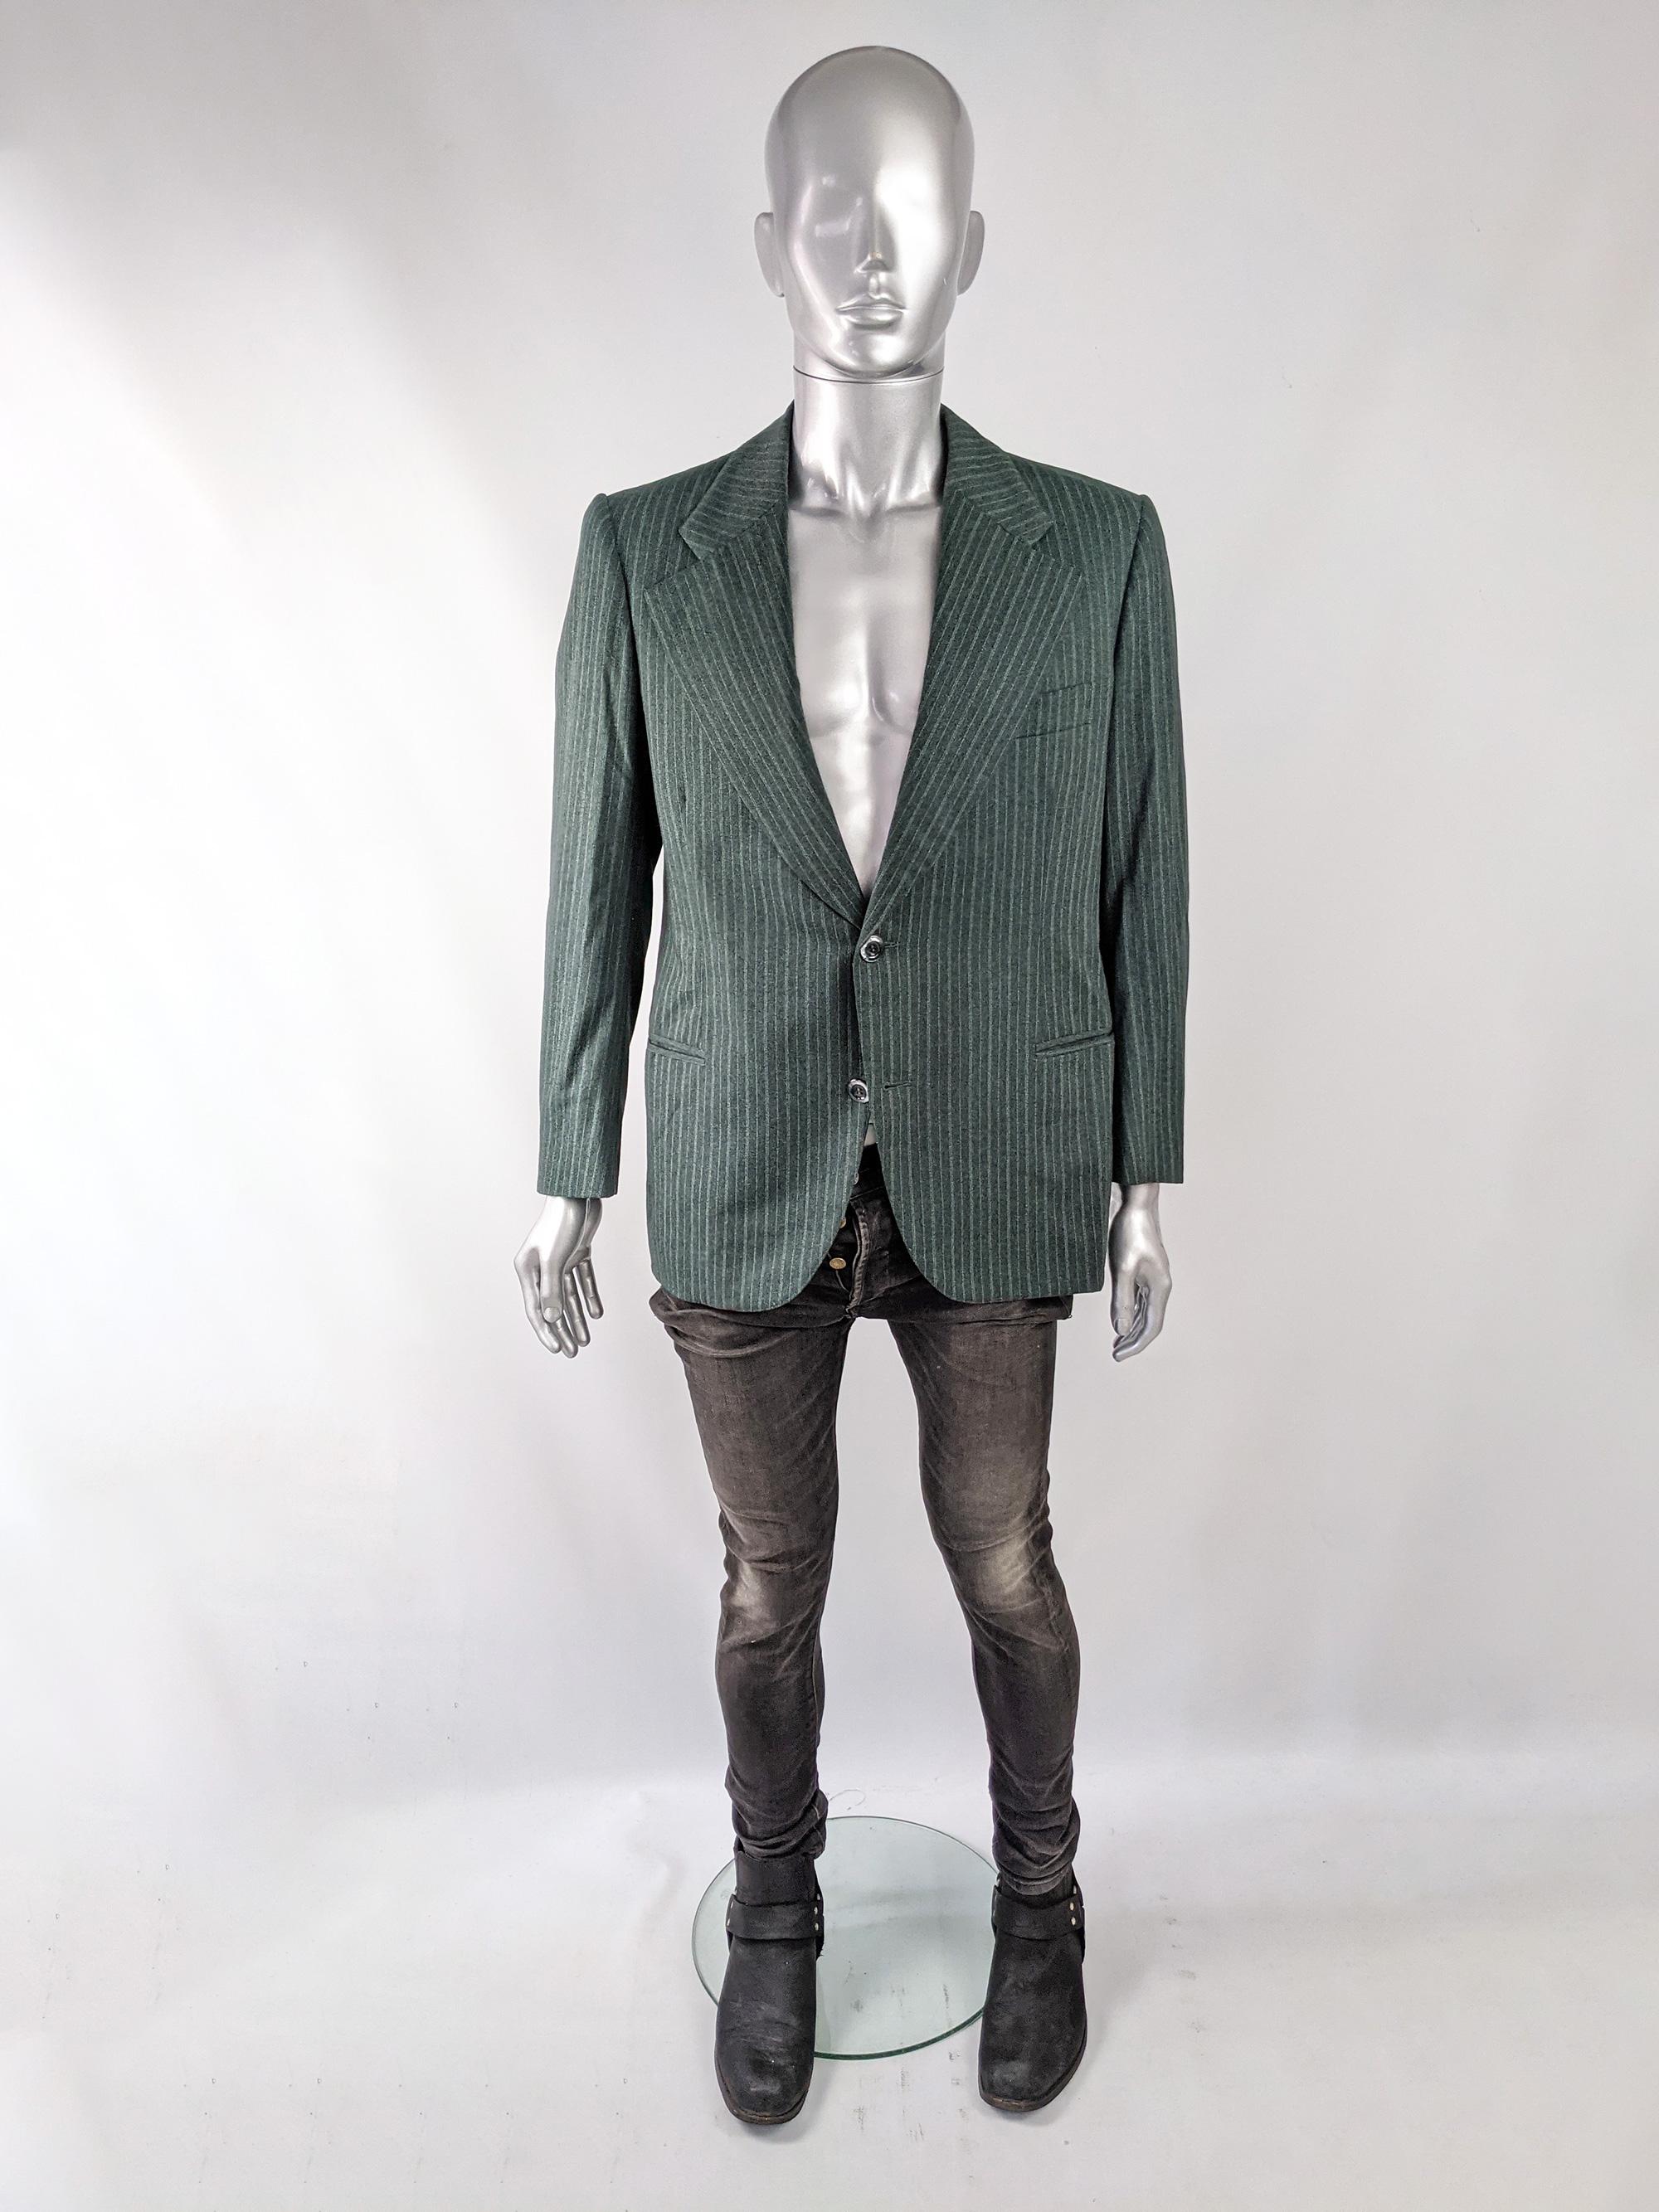 A stylish vintage mens blazer from the 70s by luxury Italian fashion house, Cerruti 1881. In a green wool fabric with a pinstripe throughout. It has wide notched lapels and a ventless back. 

Size: Unlabelled; measures roughly like a modern mens